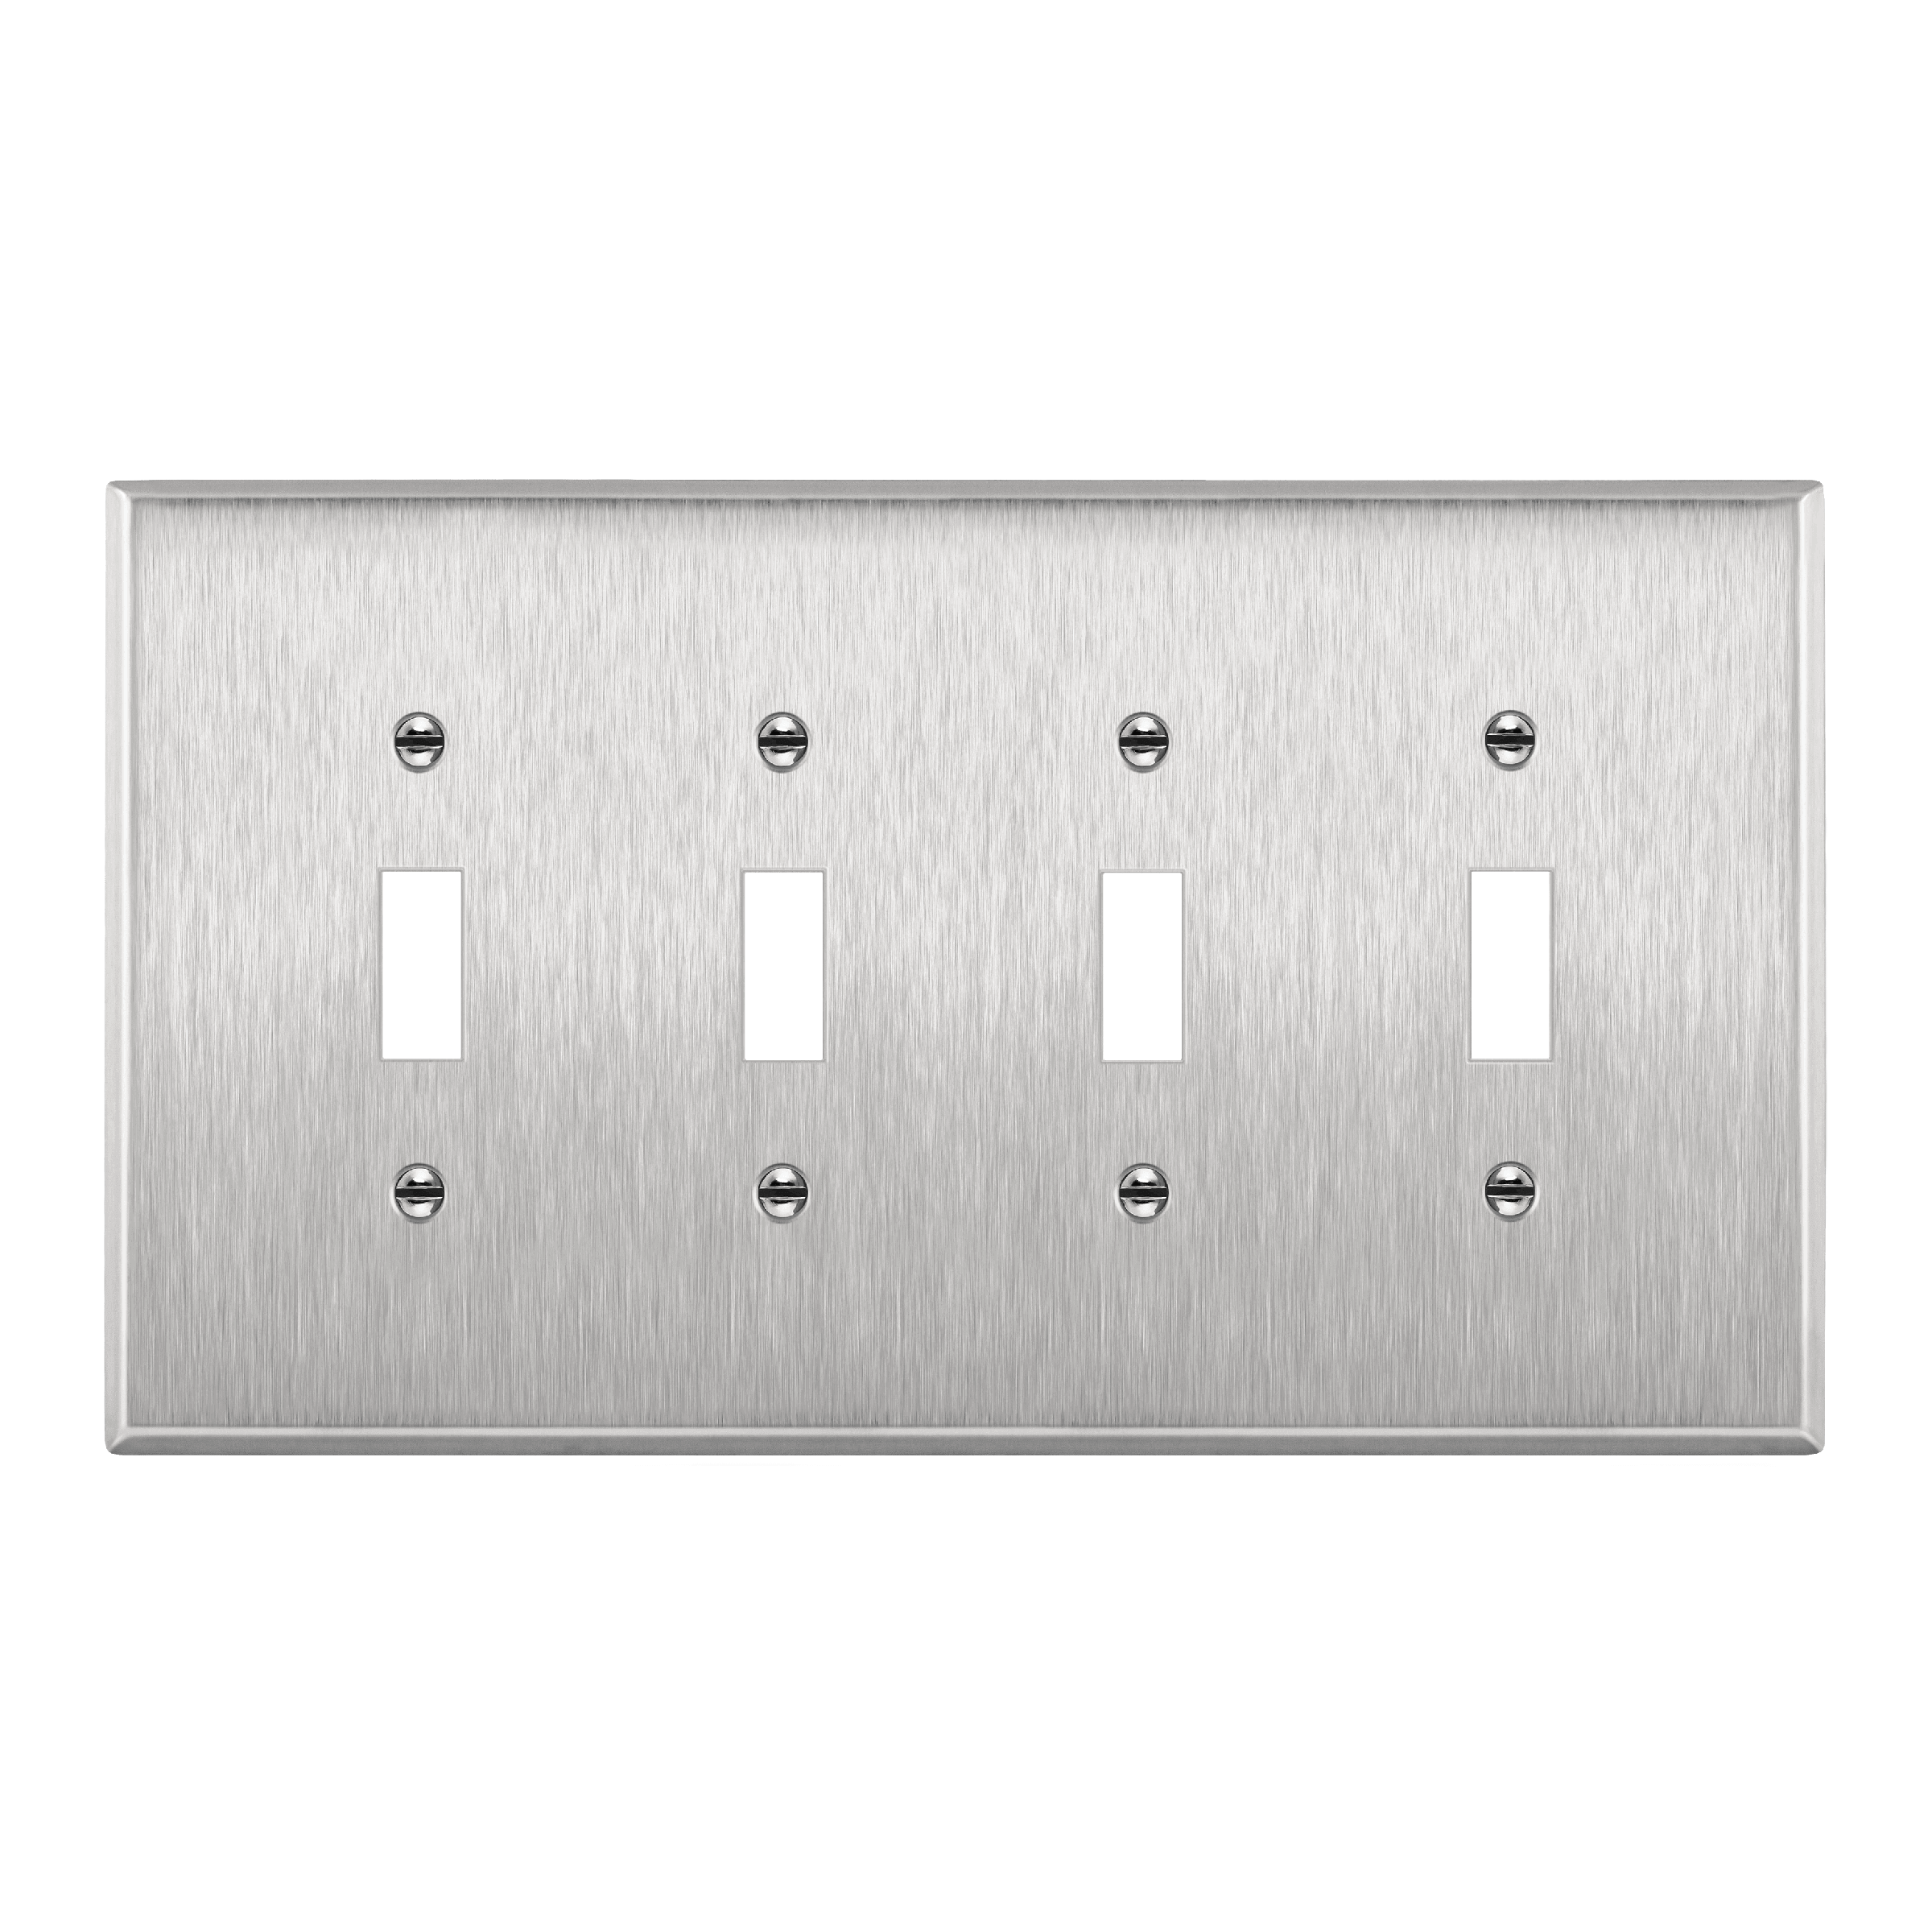 Oak Reclaimed Wood Wall Plate - 1 Gang GFCI Outlet Cover - Virgin